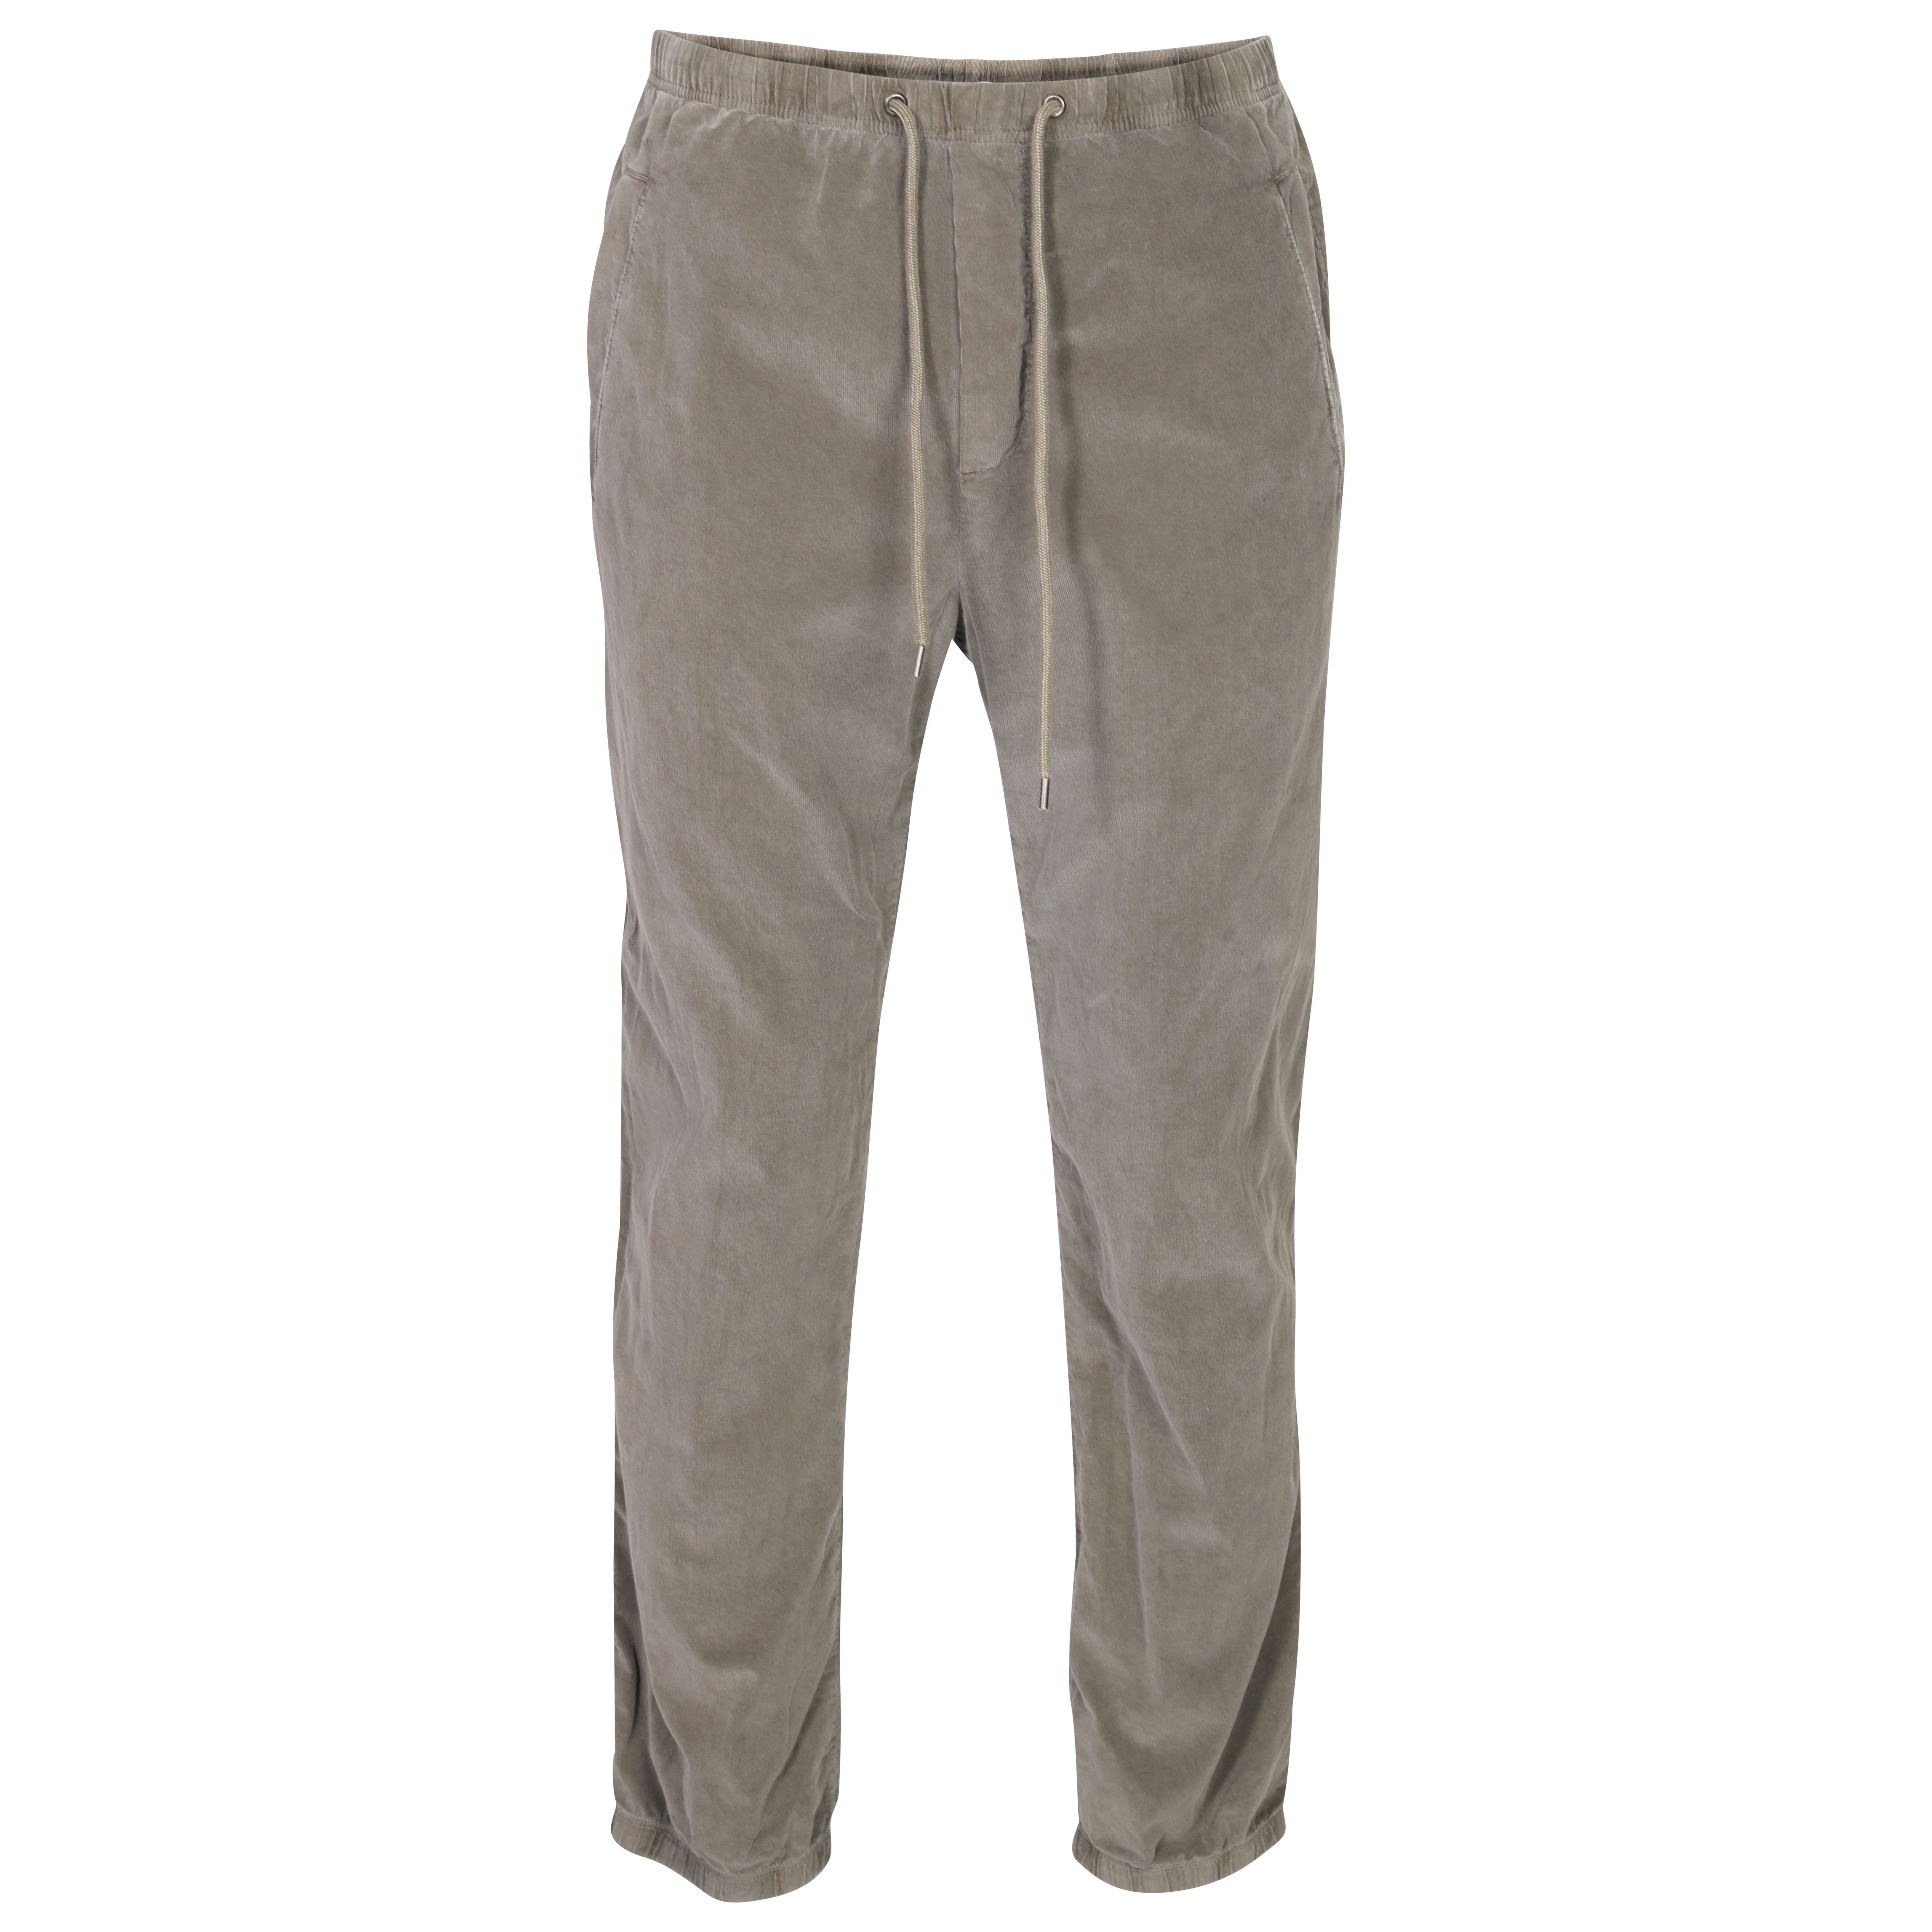 James Perse Ultra Fine Cord Pant in Grey XL/4